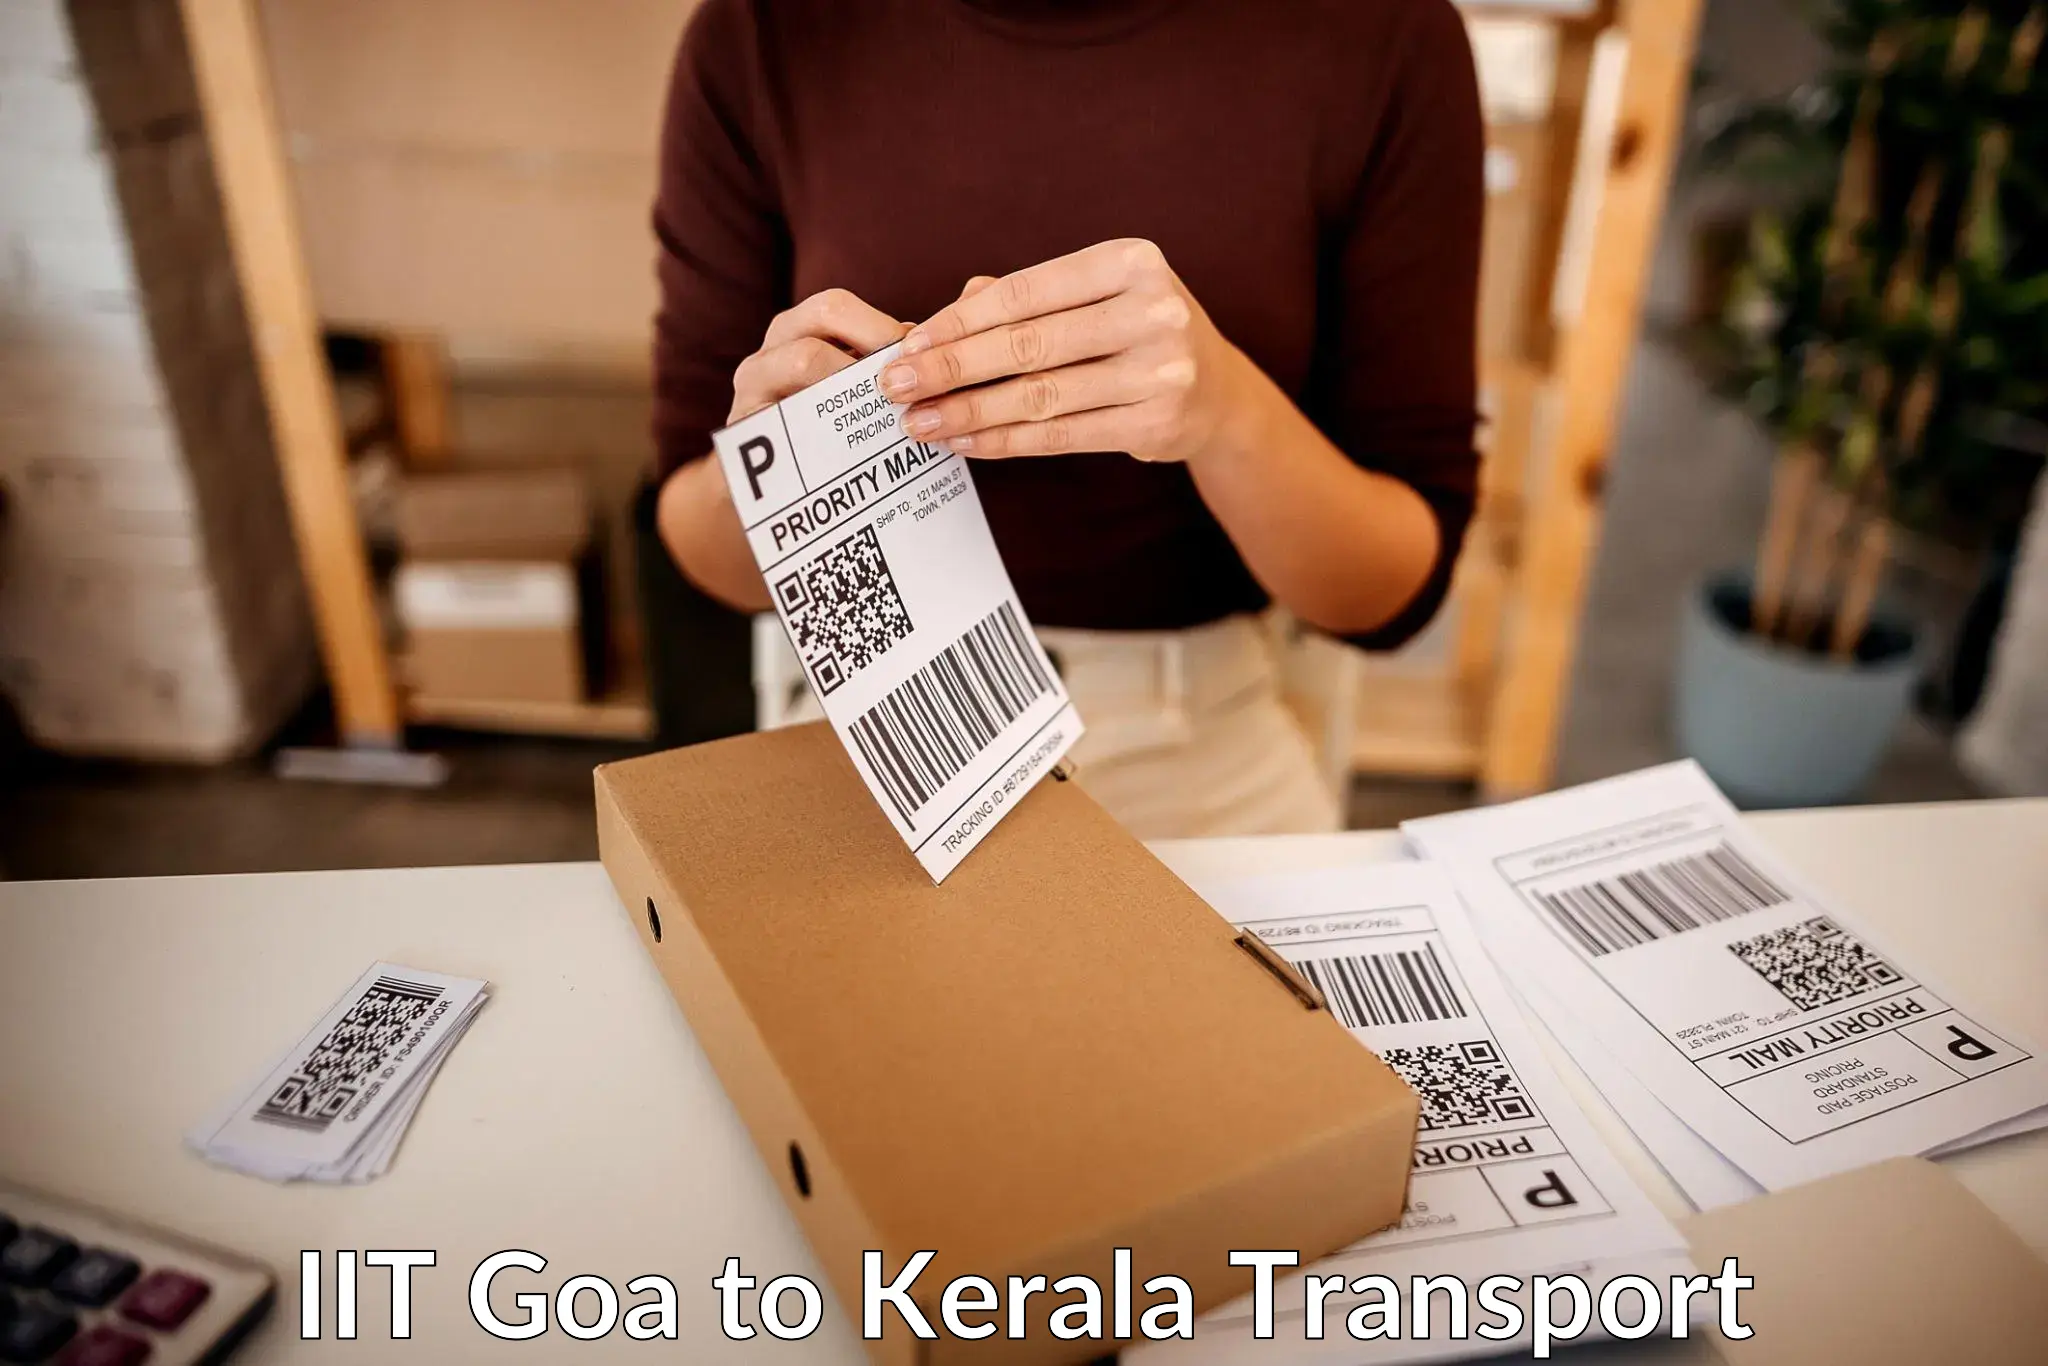 Material transport services IIT Goa to Cochin University of Science and Technology